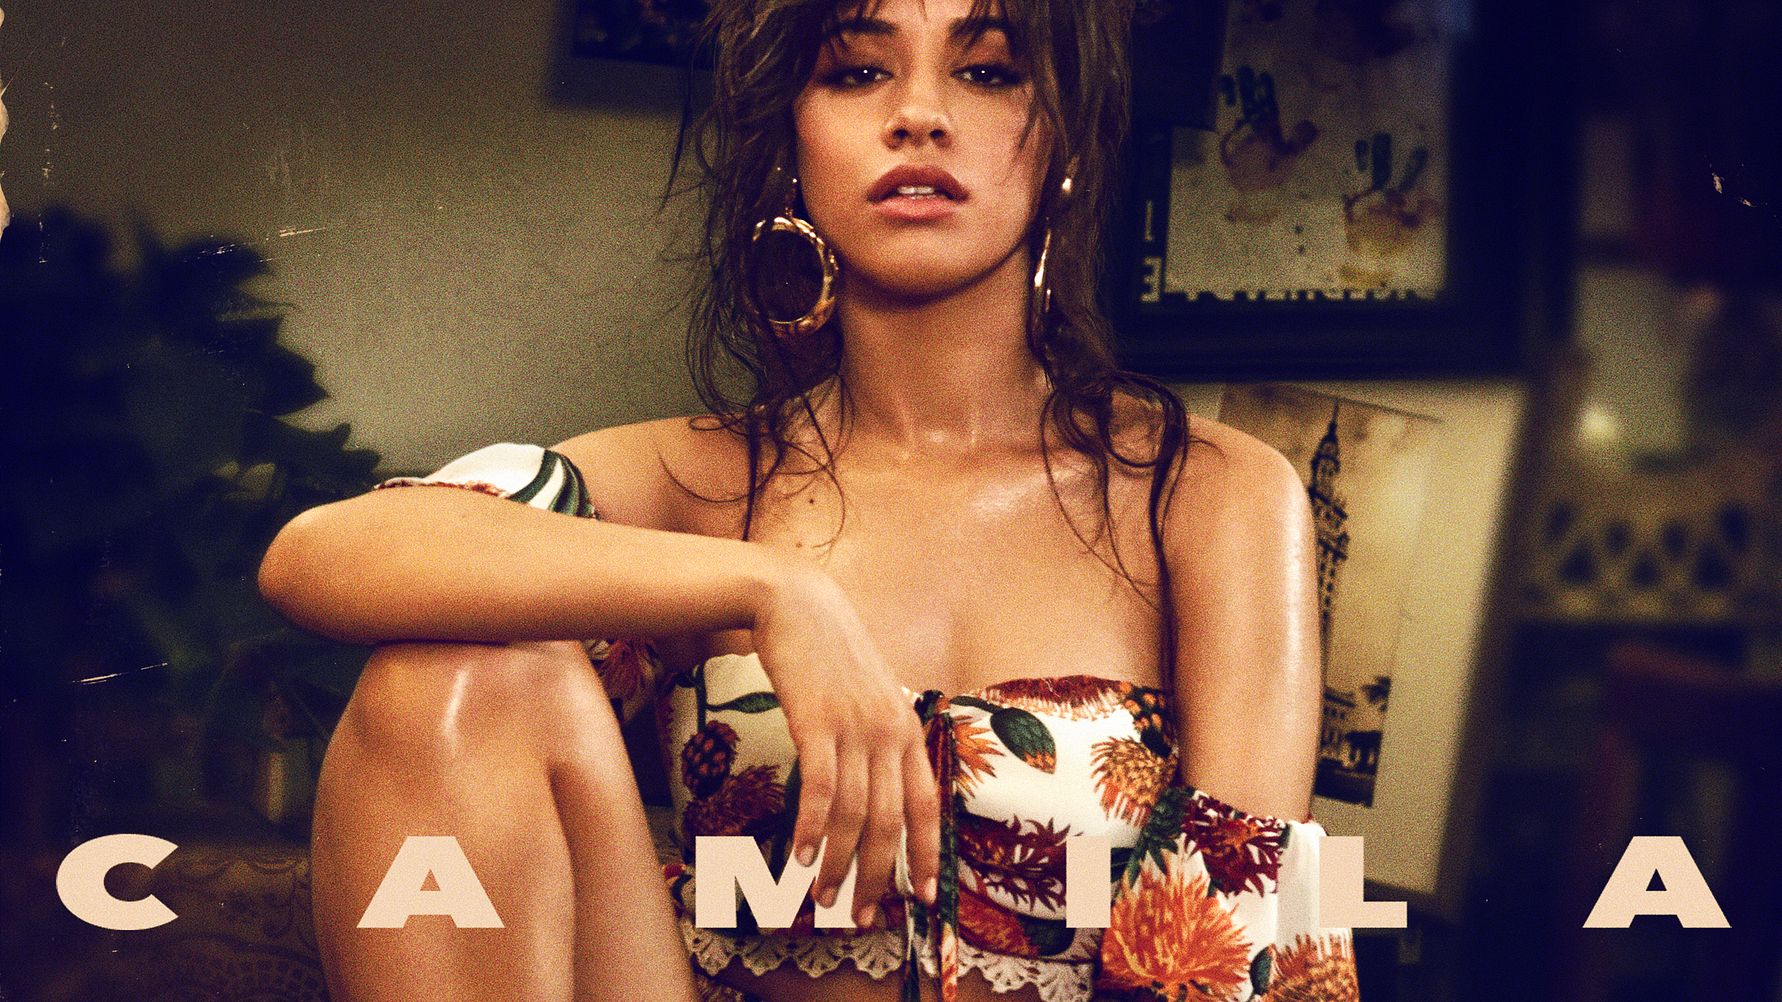 Camila Cabello breaks records and dominates the charts with her debut album